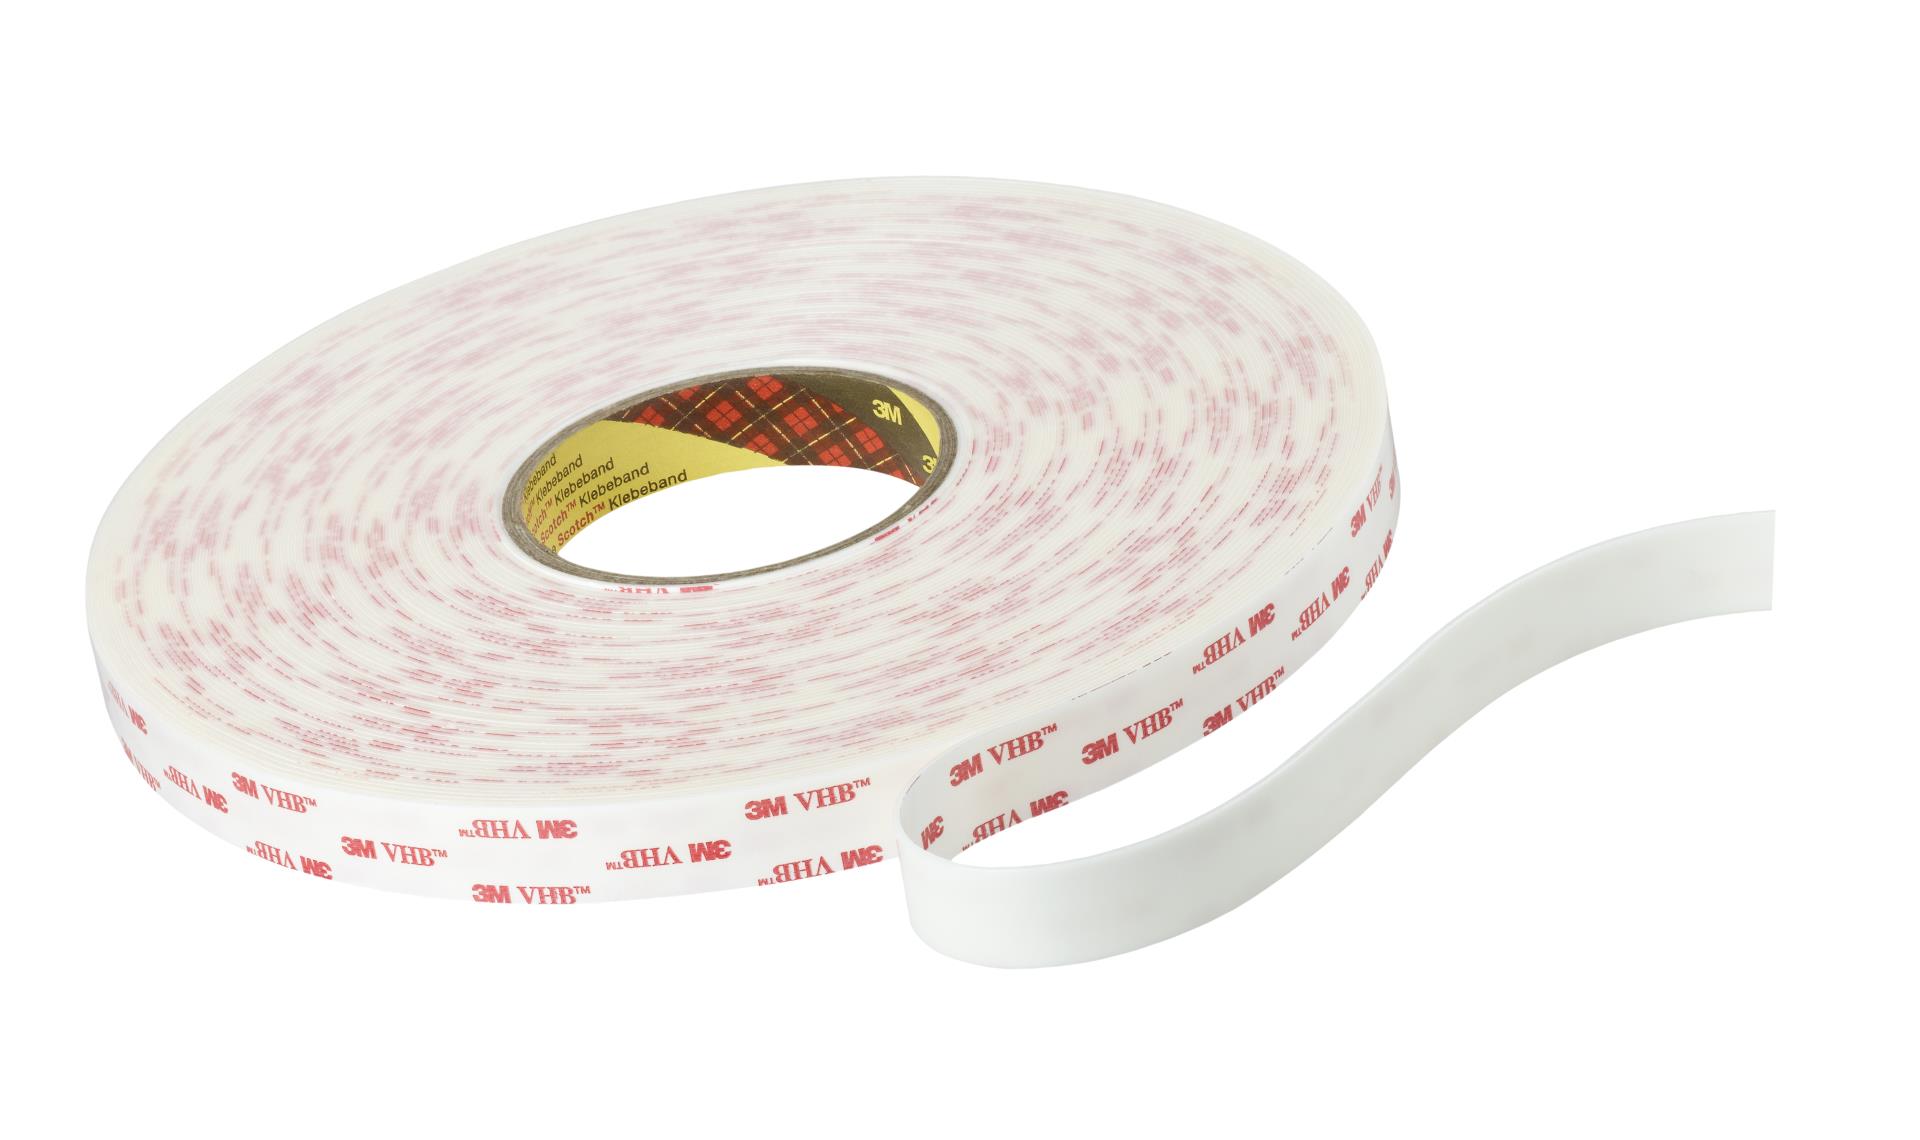 12 Roll Case / $13.50 Per Roll White Poly Tape 4"x60yds 